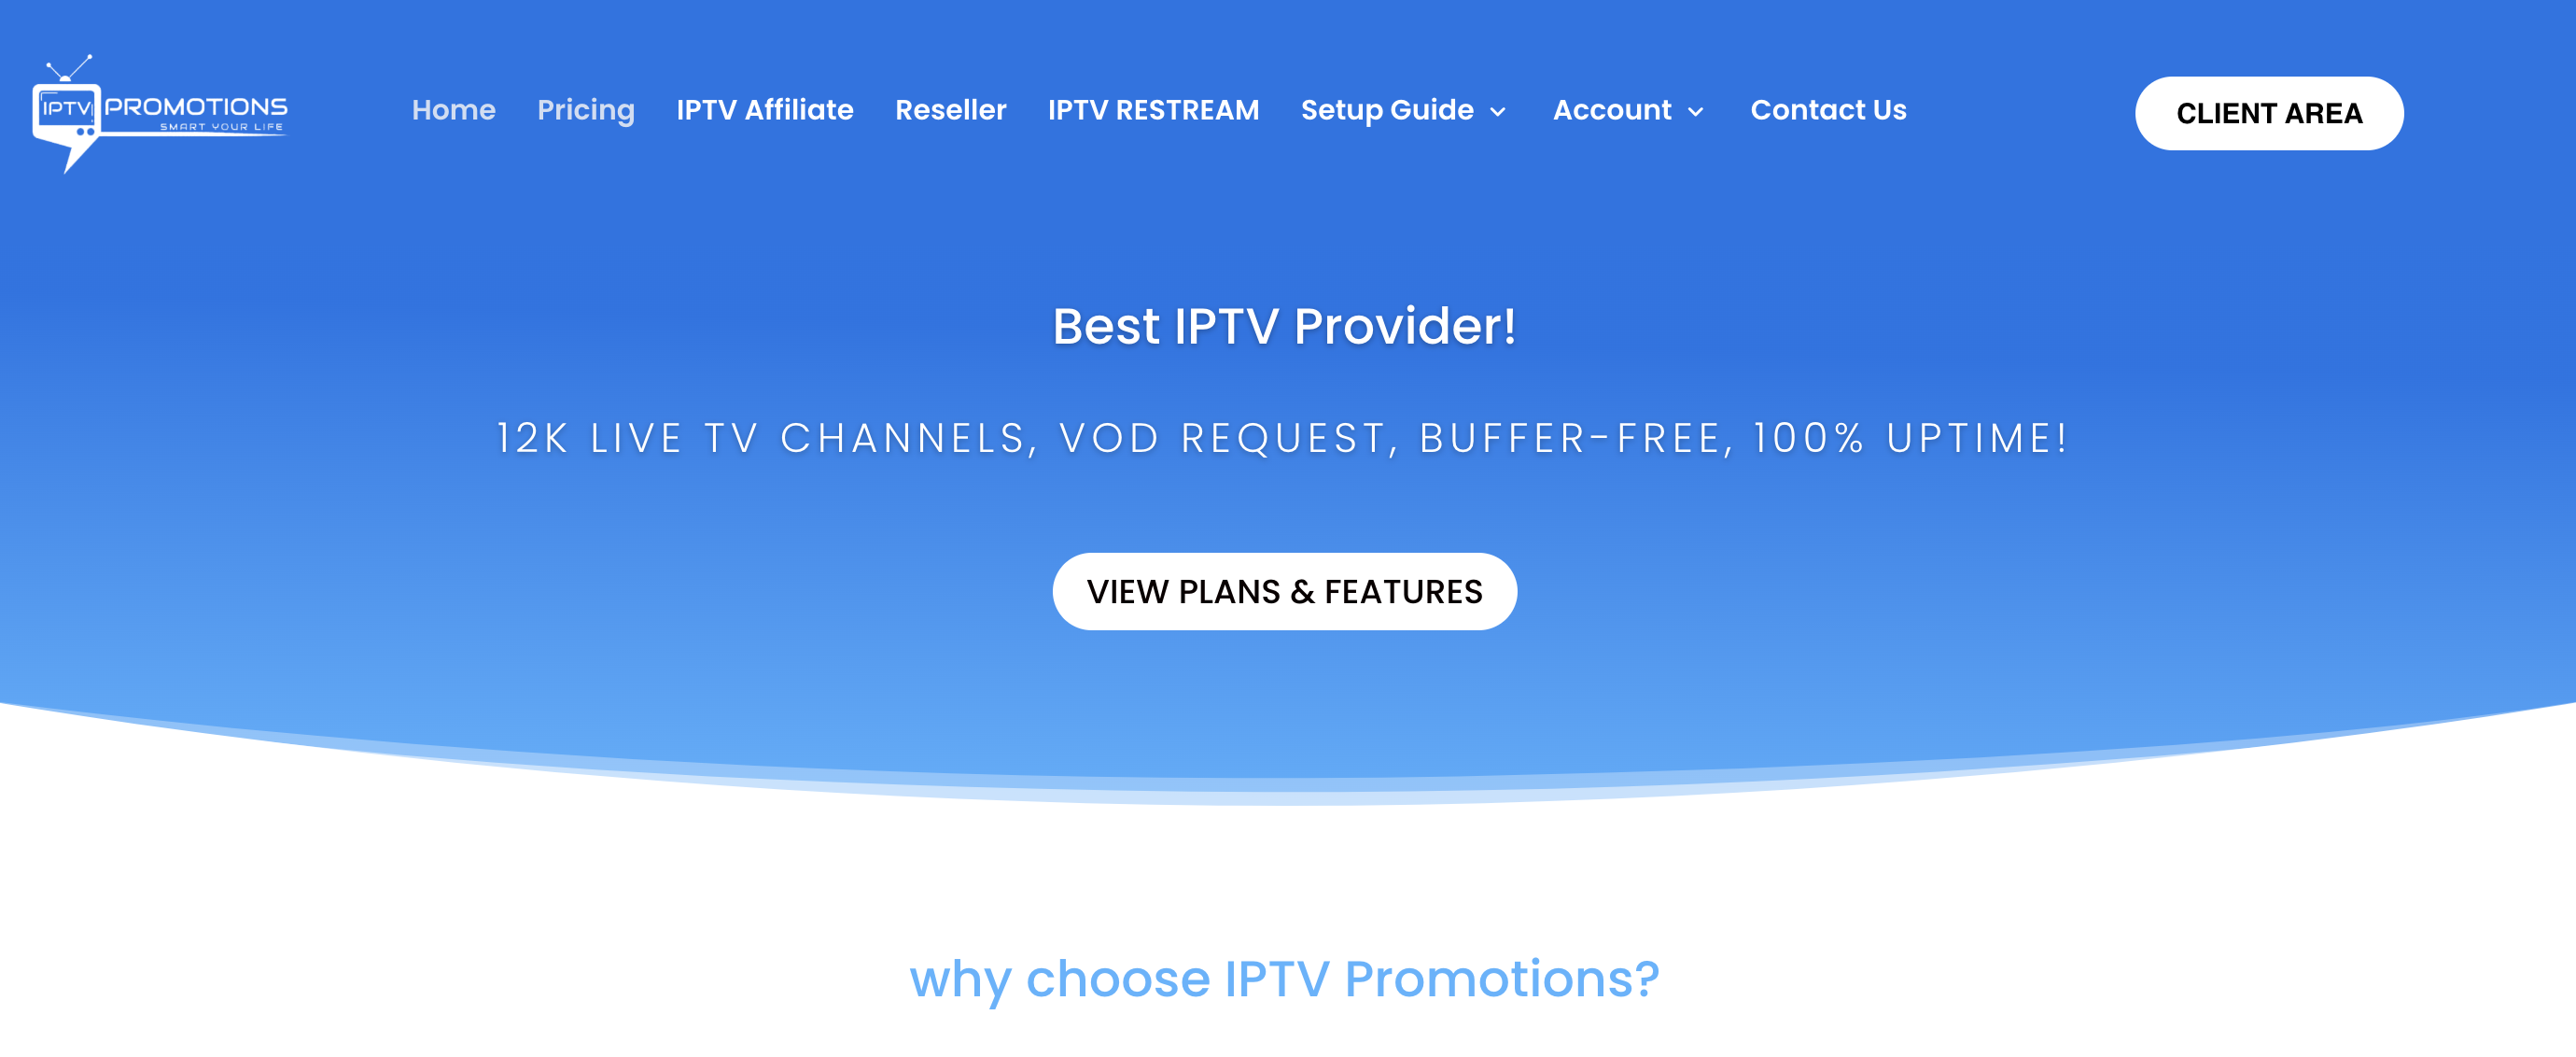 How to Install IPTV Promotions